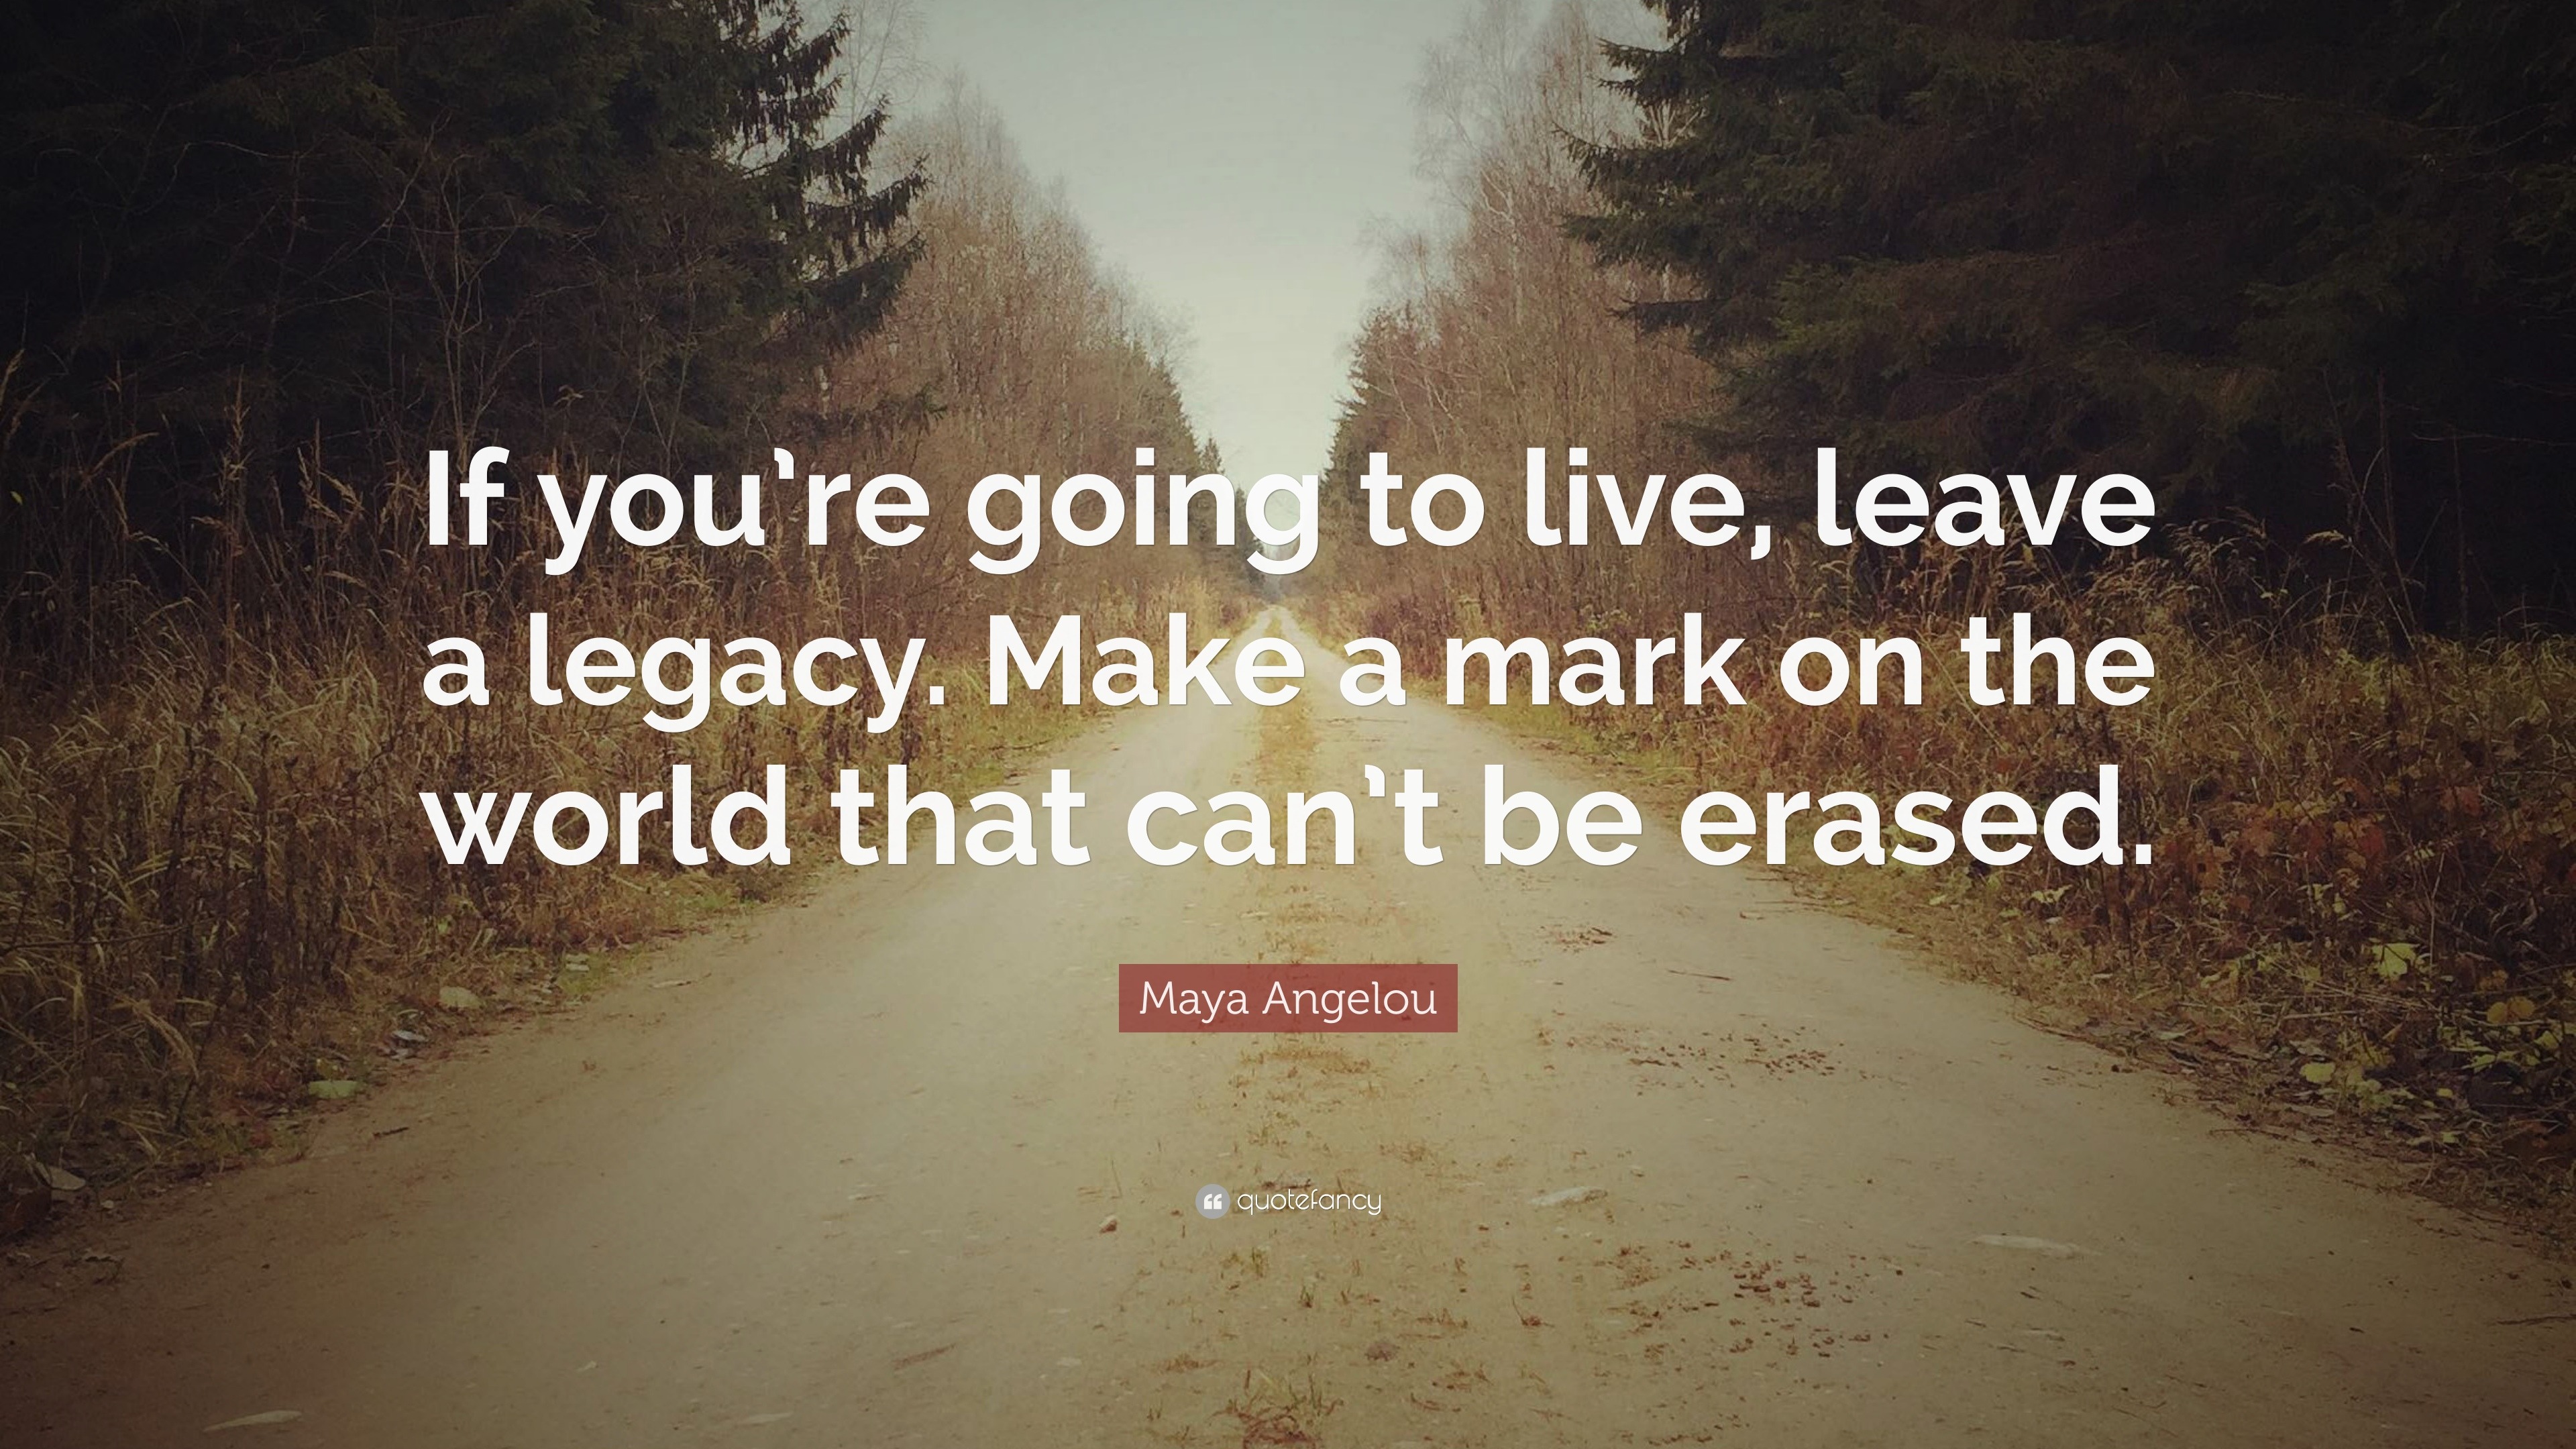 Maya Angelou Quote: “If you’re going to live, leave a legacy. Make a